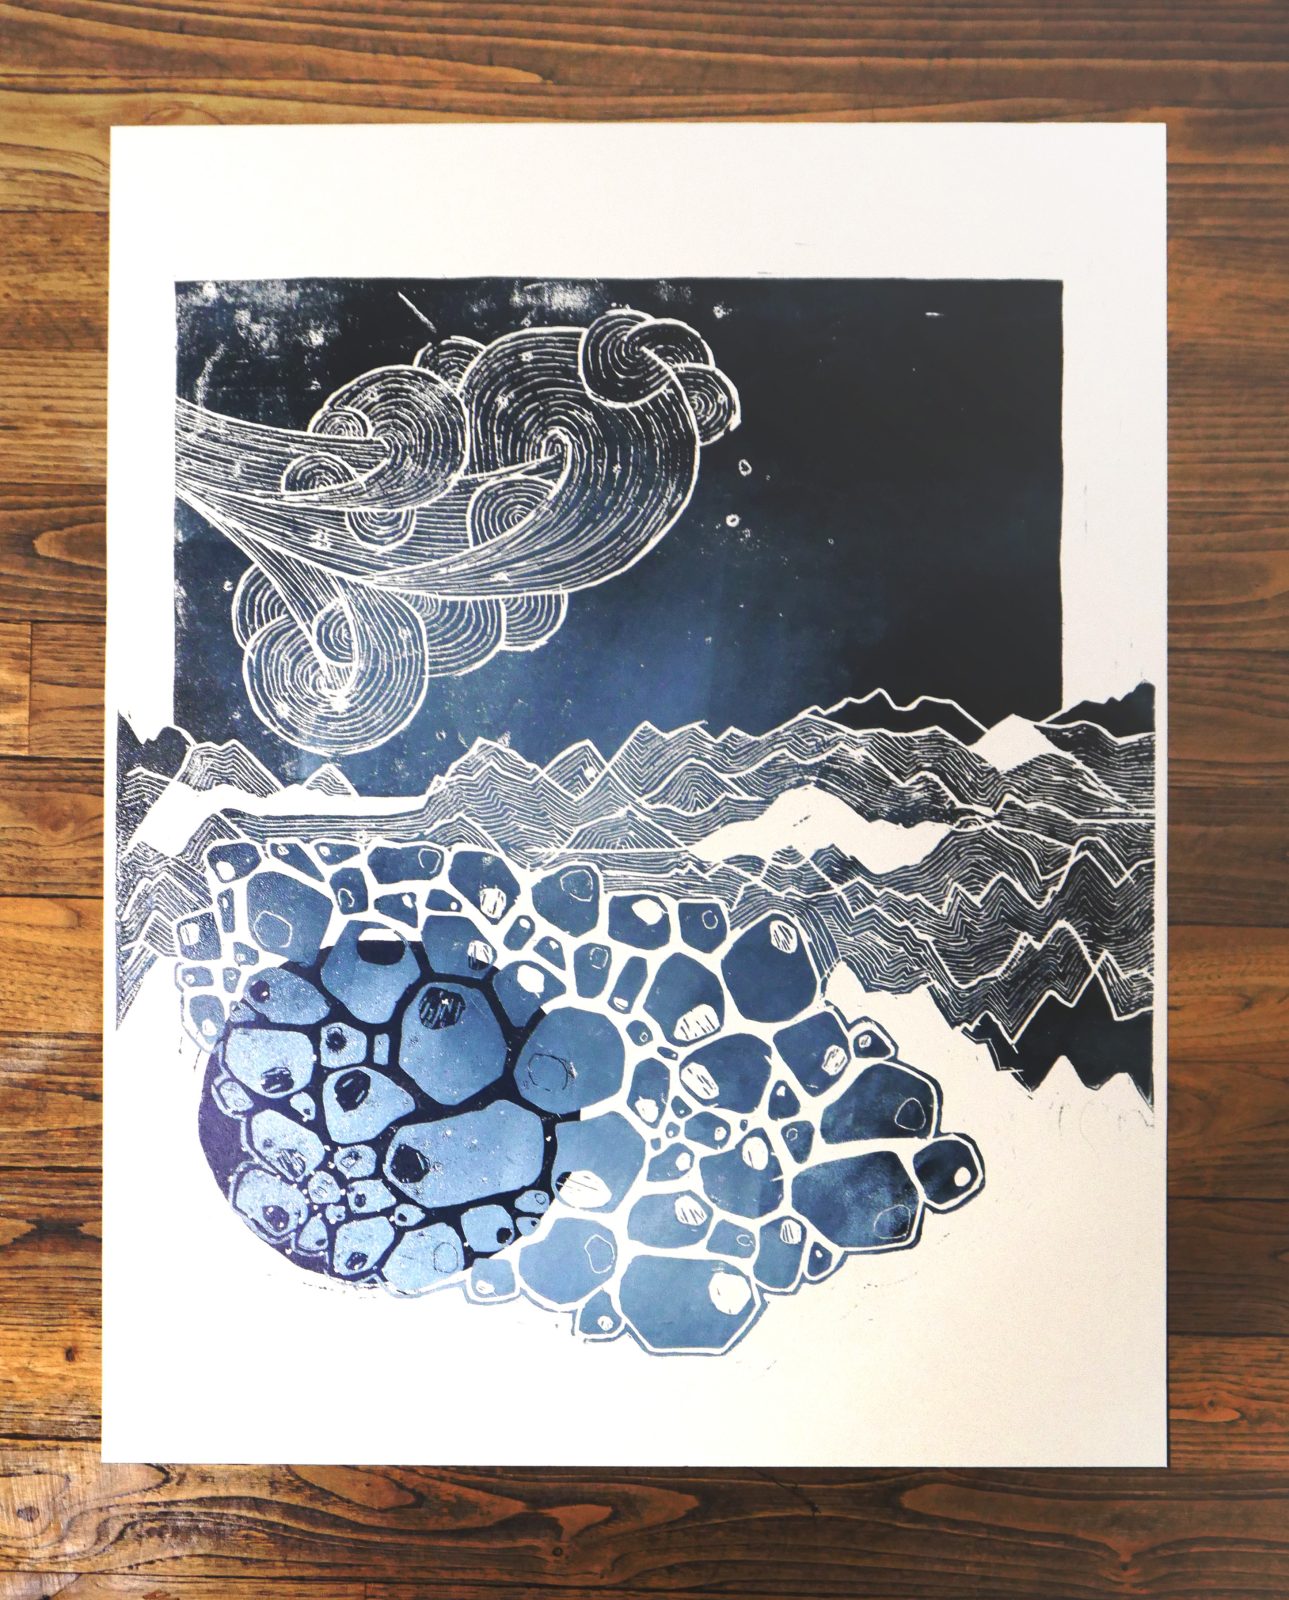 Best of Print: Workshop with Nora wagner